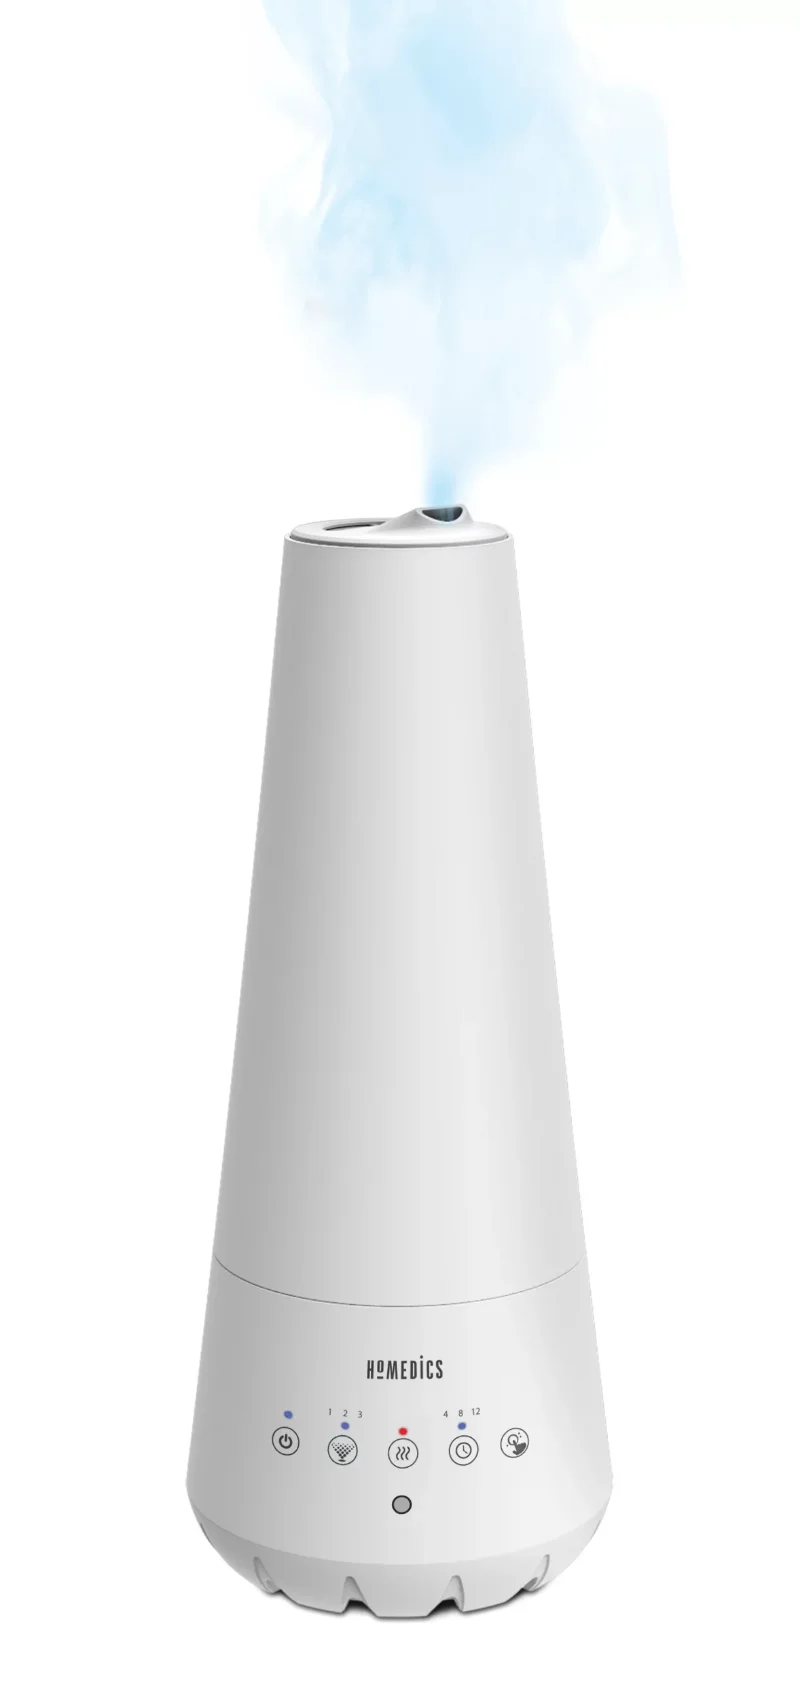 HoMedics 2 in 1, Warm & Cool Mist Ultrasonic Humidifier with Essential Oil Tray. UHE-WM10